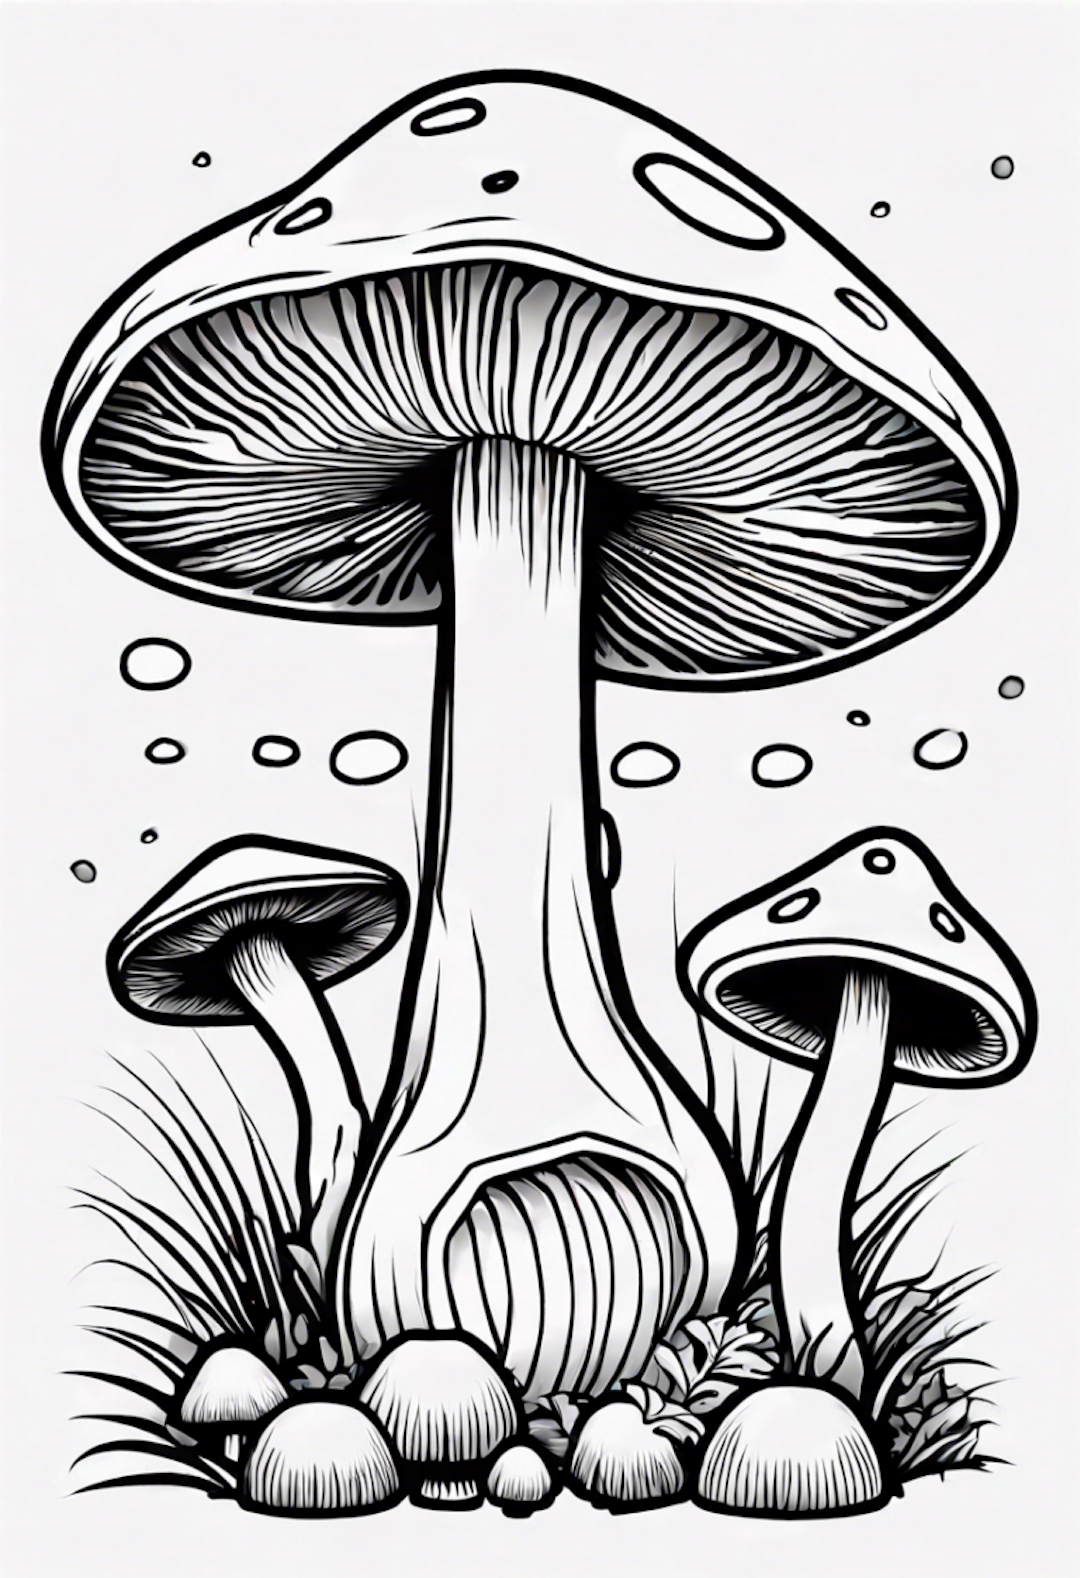 Mushroom Zoo Adventure coloring pages